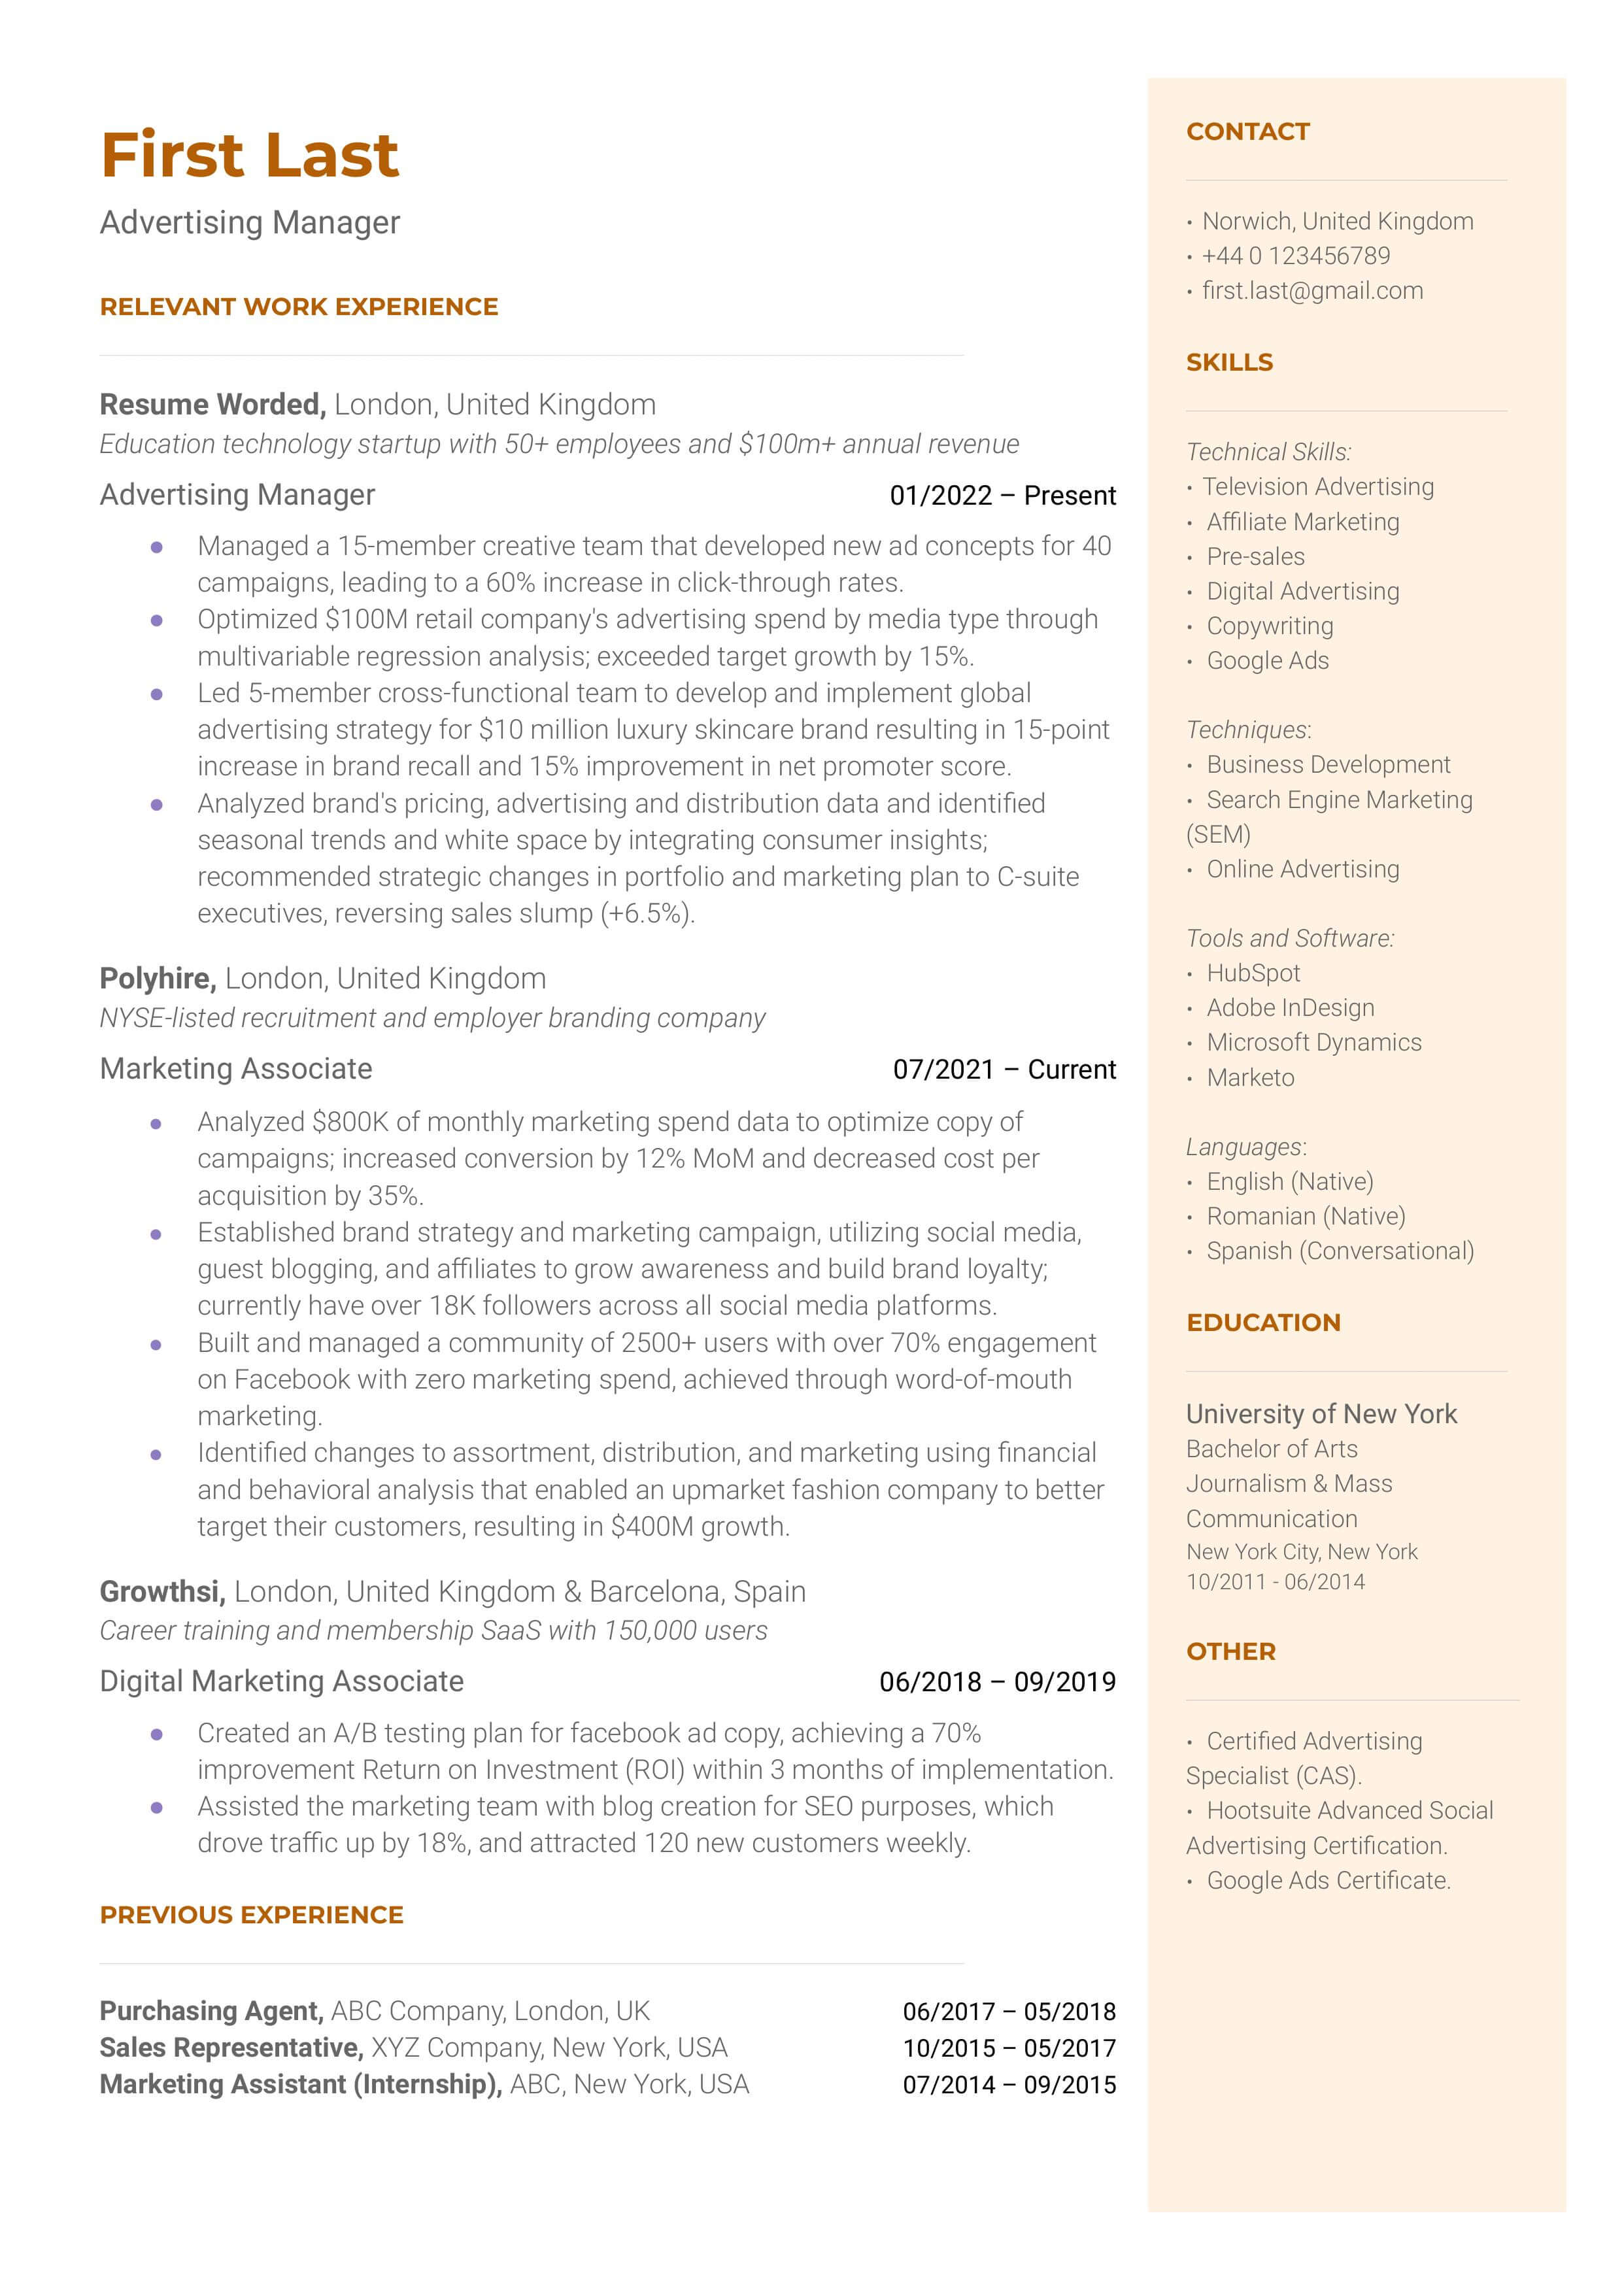 Advertising Manager Resume Template + Example